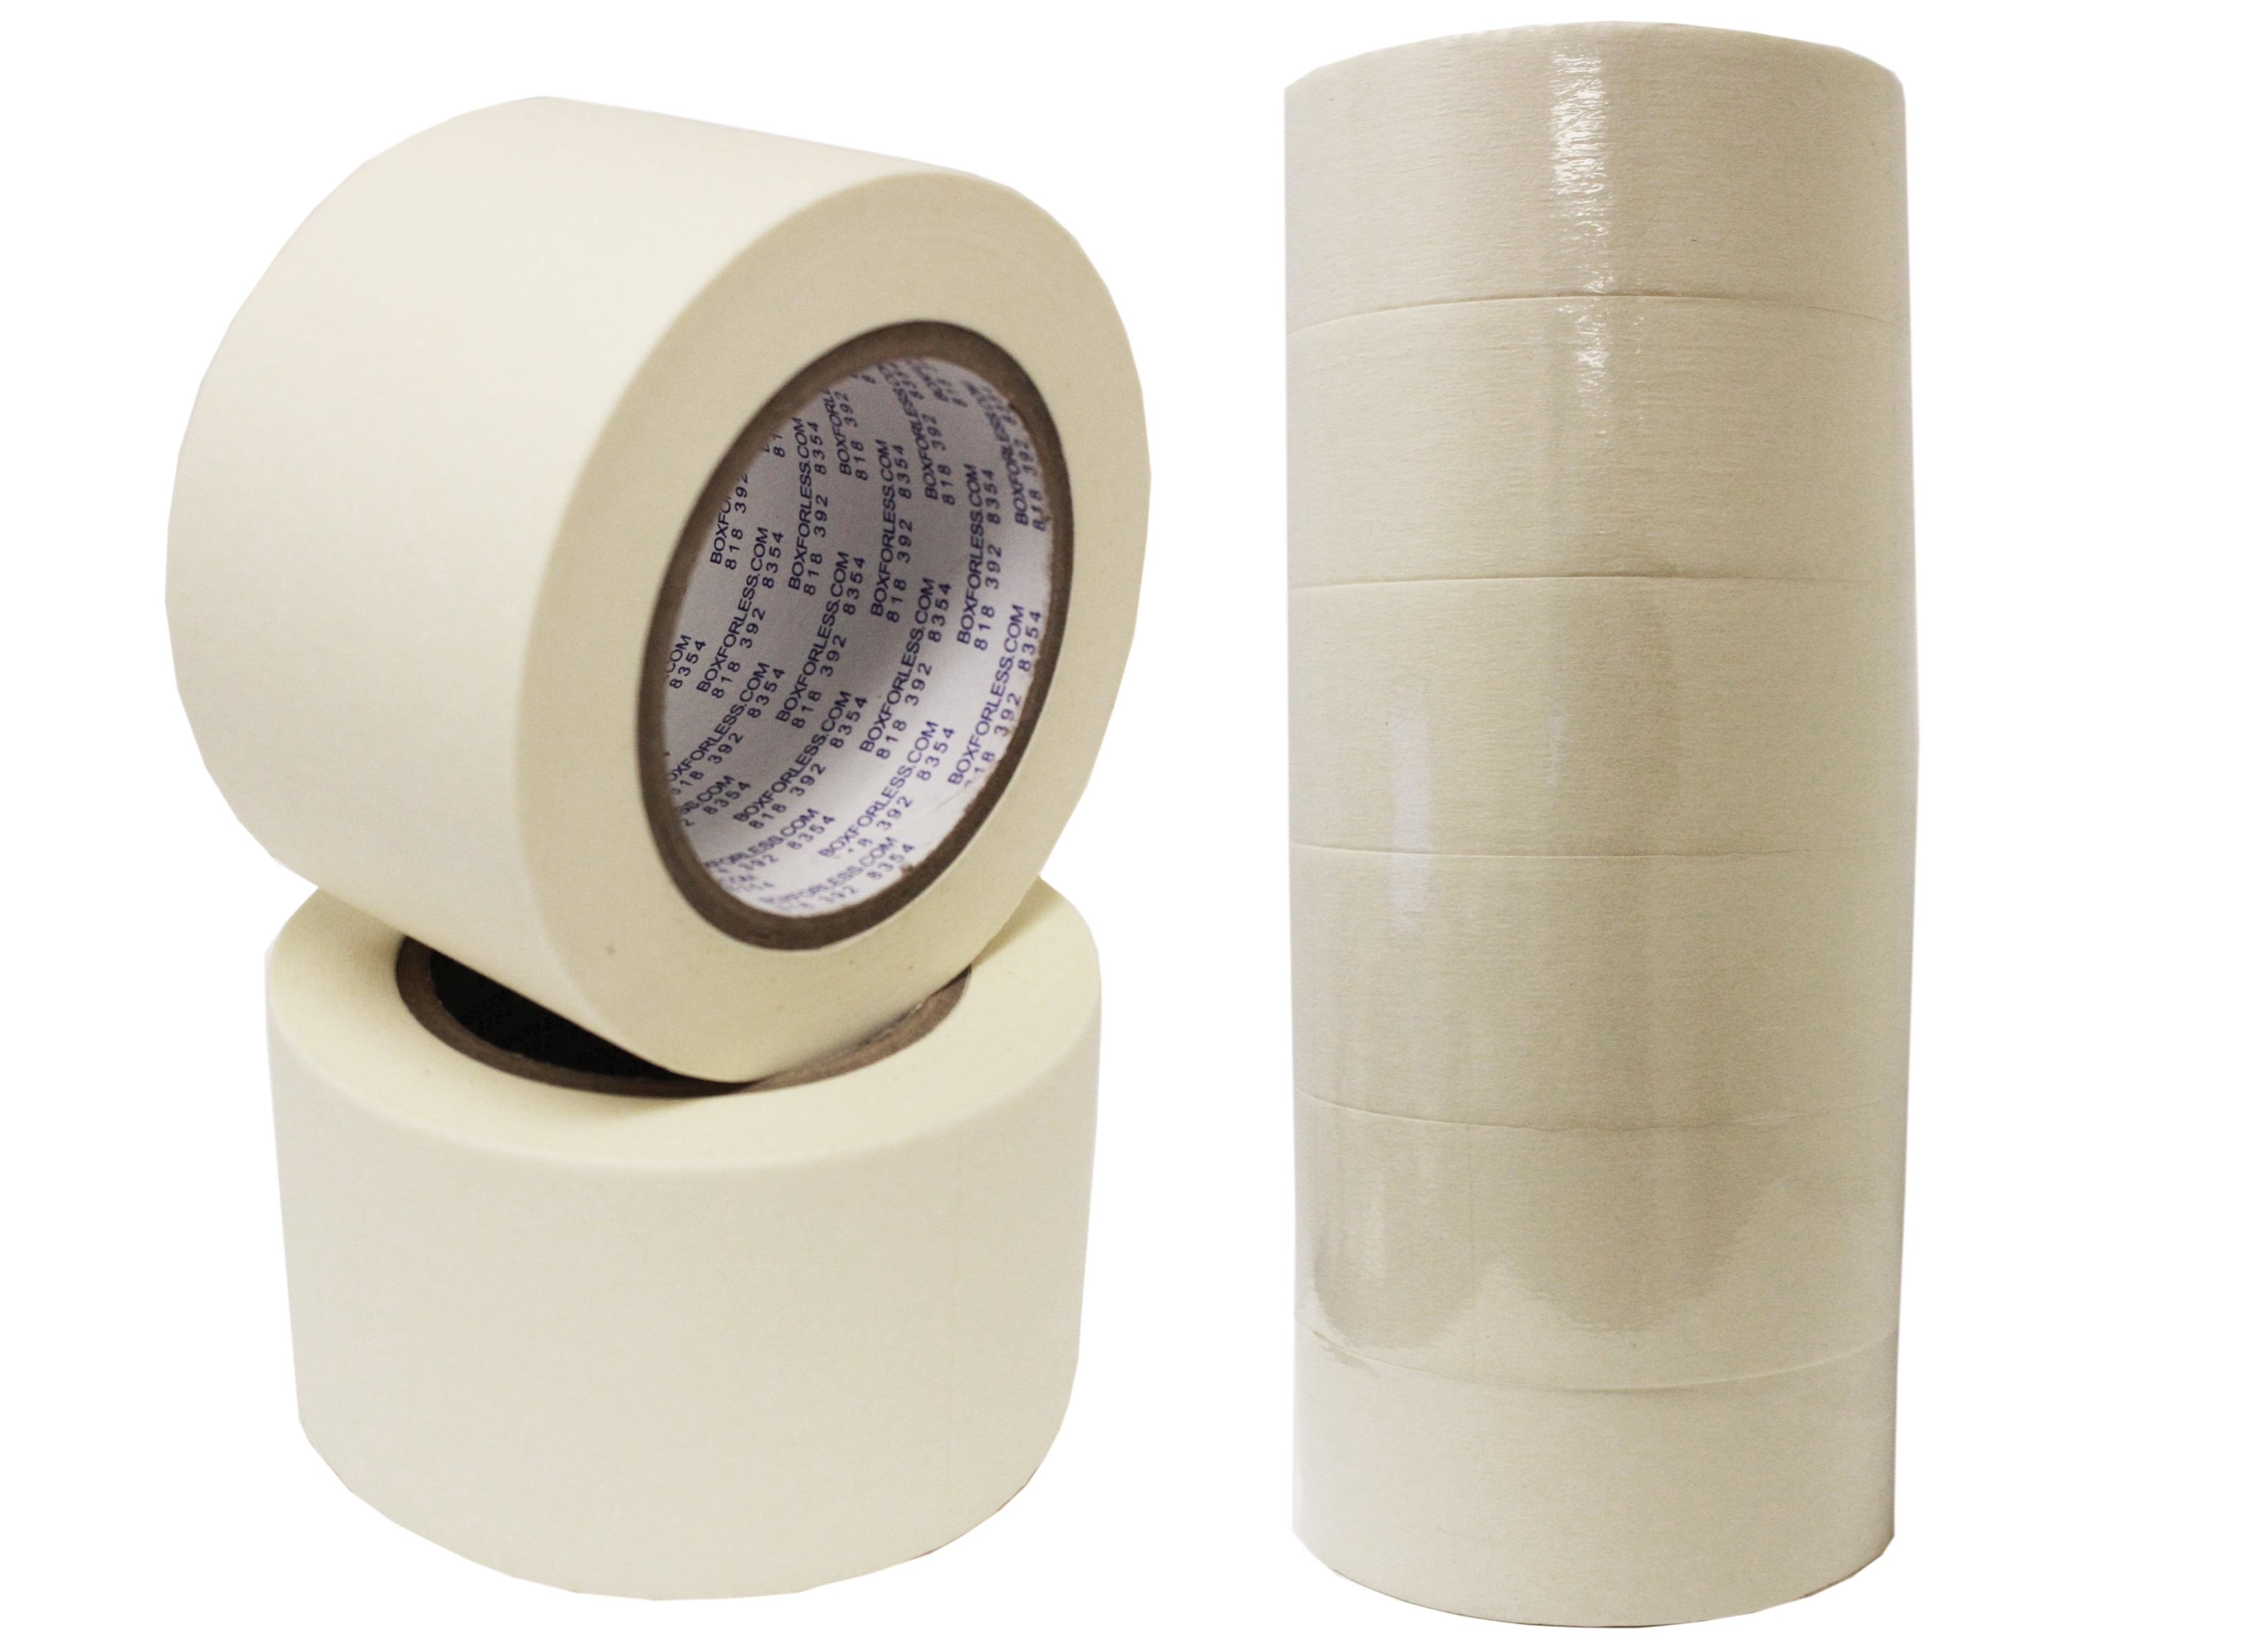 1 x 60 Yards White Masking Tape for General Purpose, Natural Rubber buy in  stock in U.S. in IDL Packaging